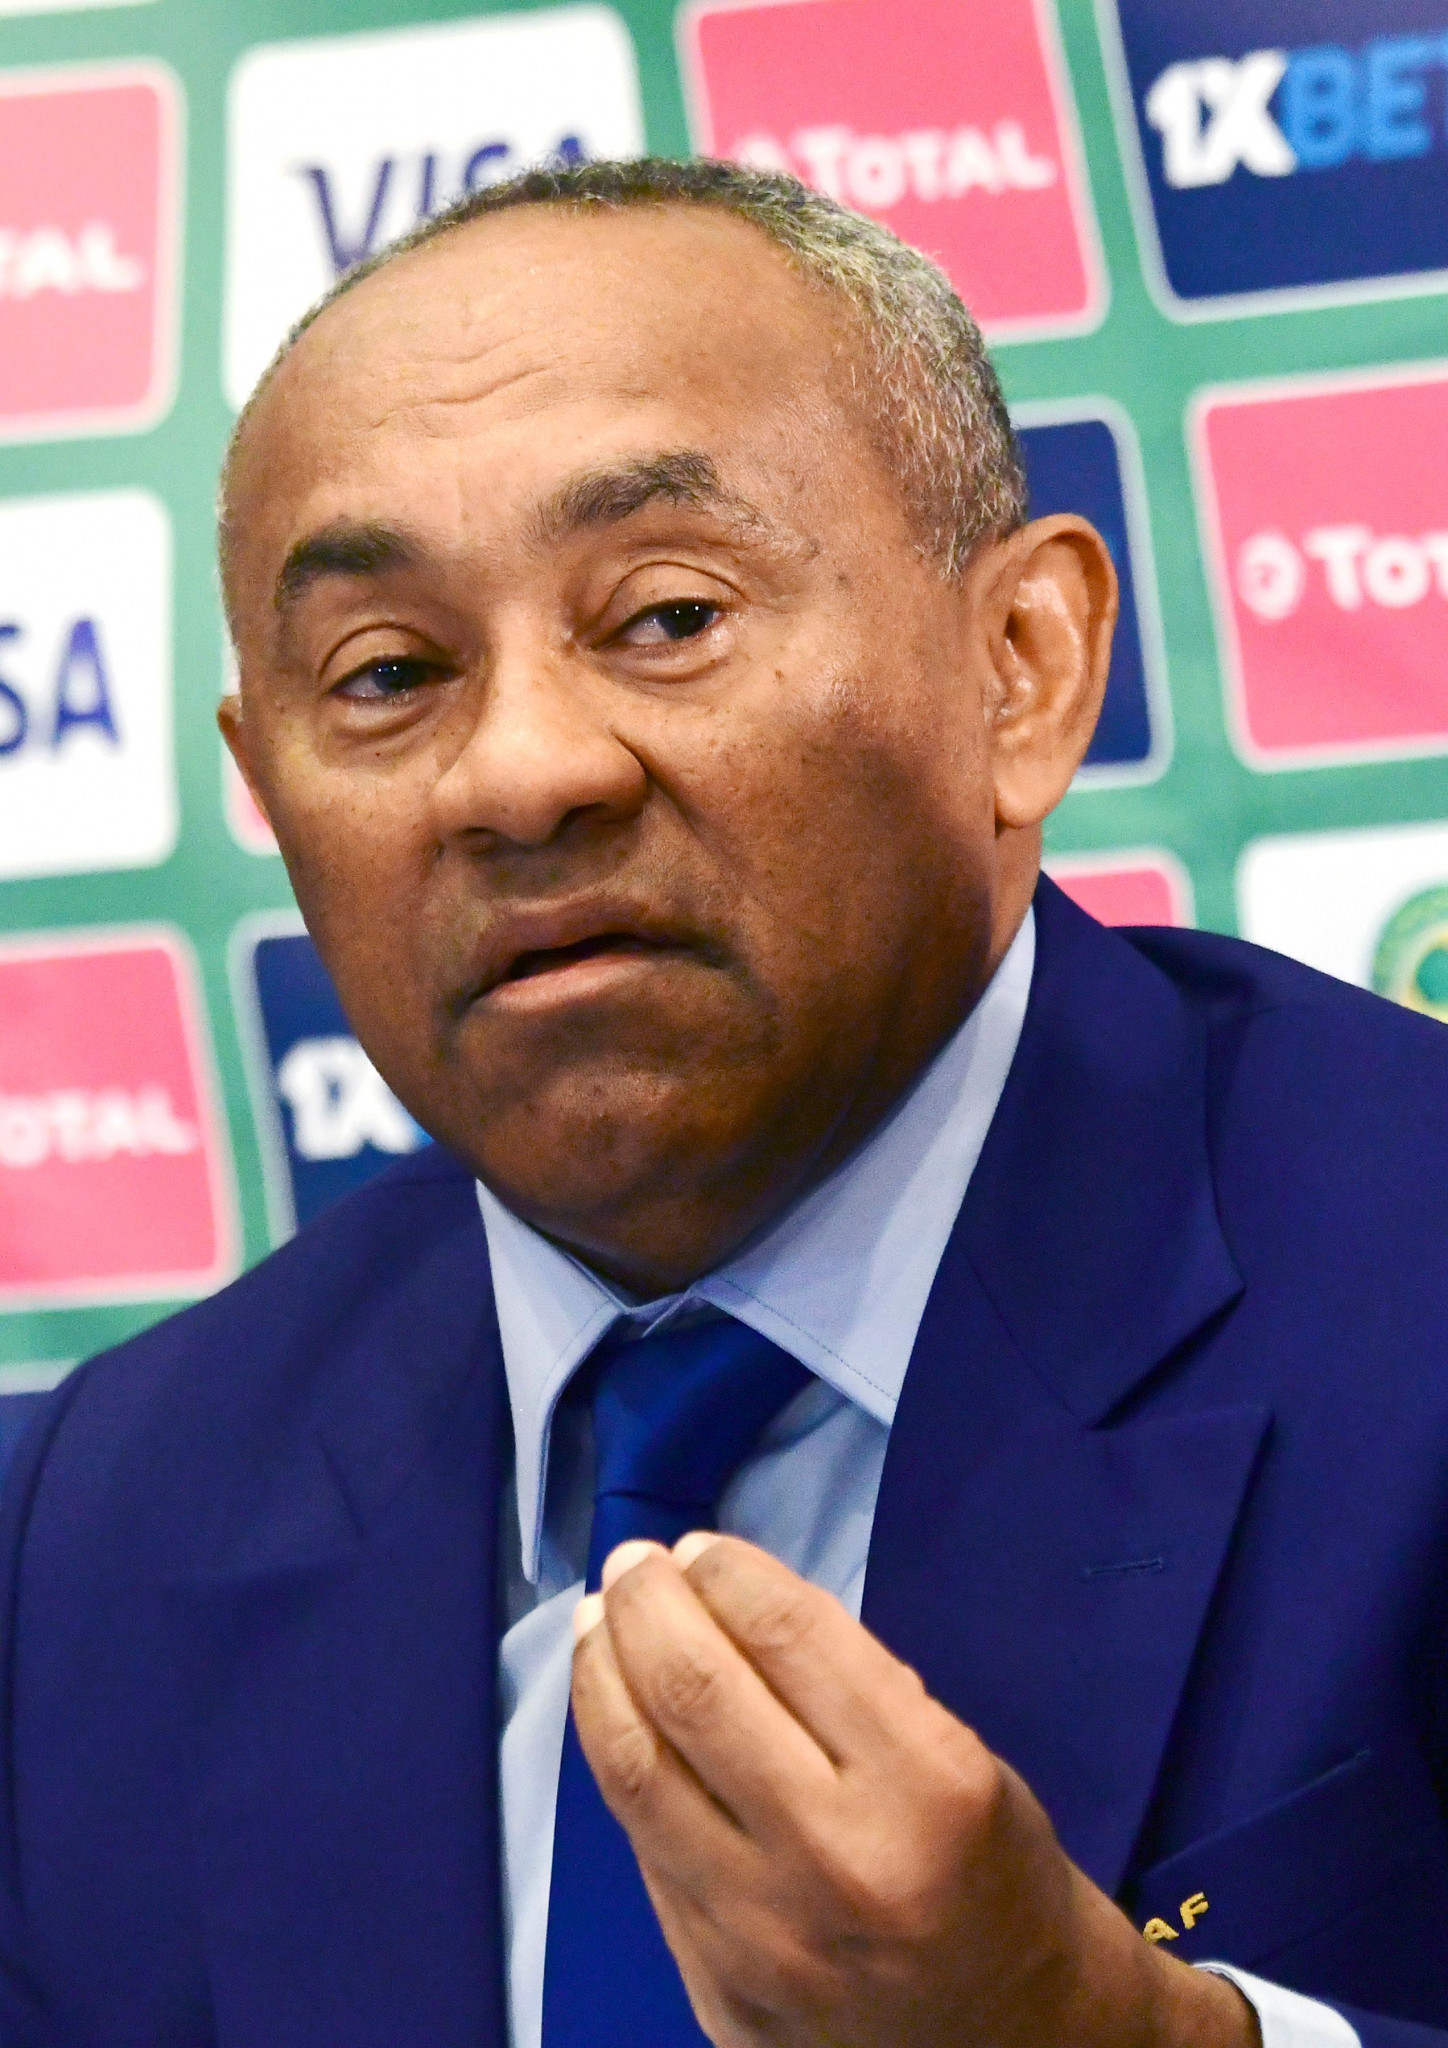 CAF President Ahmad Ahmad said Cameroon, stripped of the 2019 Africa Cup of Nations, had been awarded the 2019 African Nations Championship 